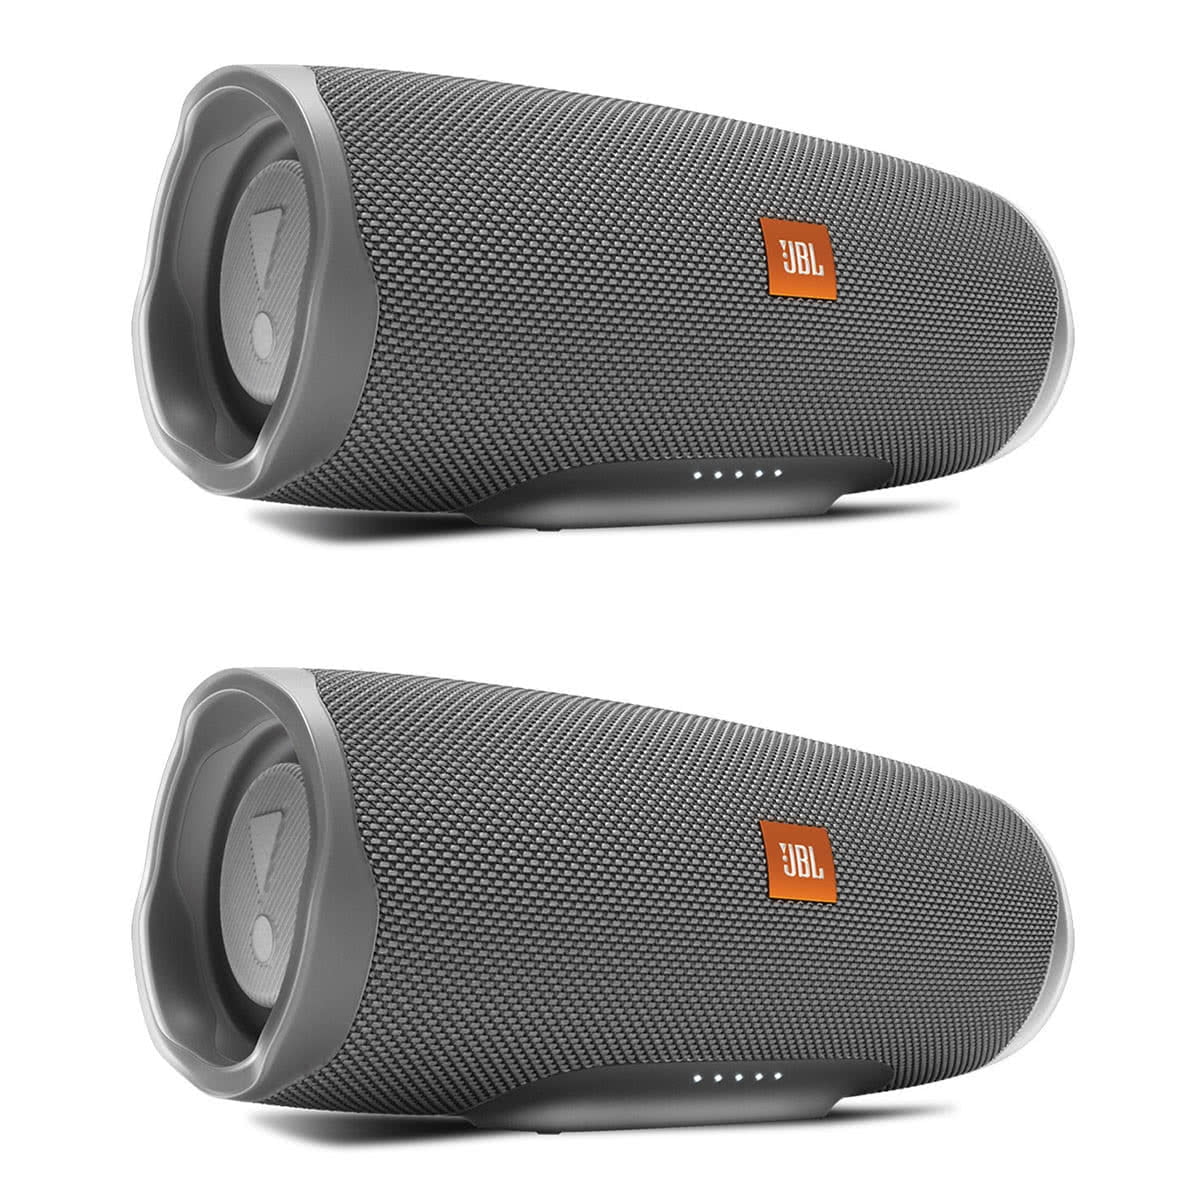 JBL Portable Bluetooth Speaker with Charges MP3 Player, Gray, JBLCHARGE4GRY-PR